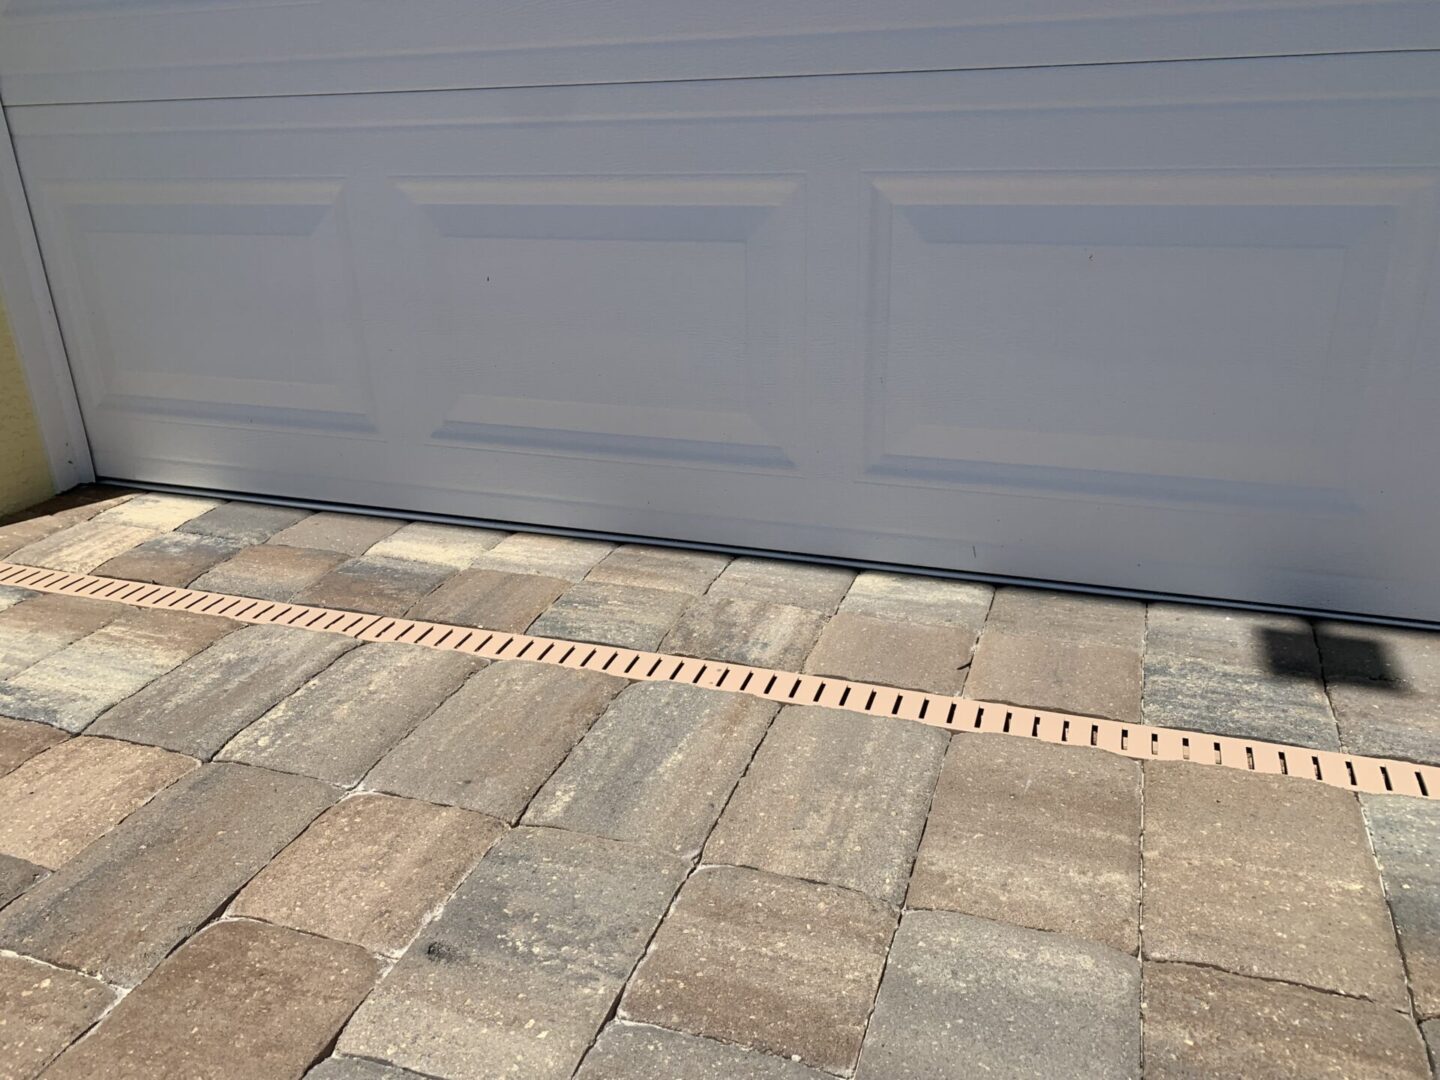 A white garage door with stone brick paving in front and a narrow drainage grate running horizontally across the base.